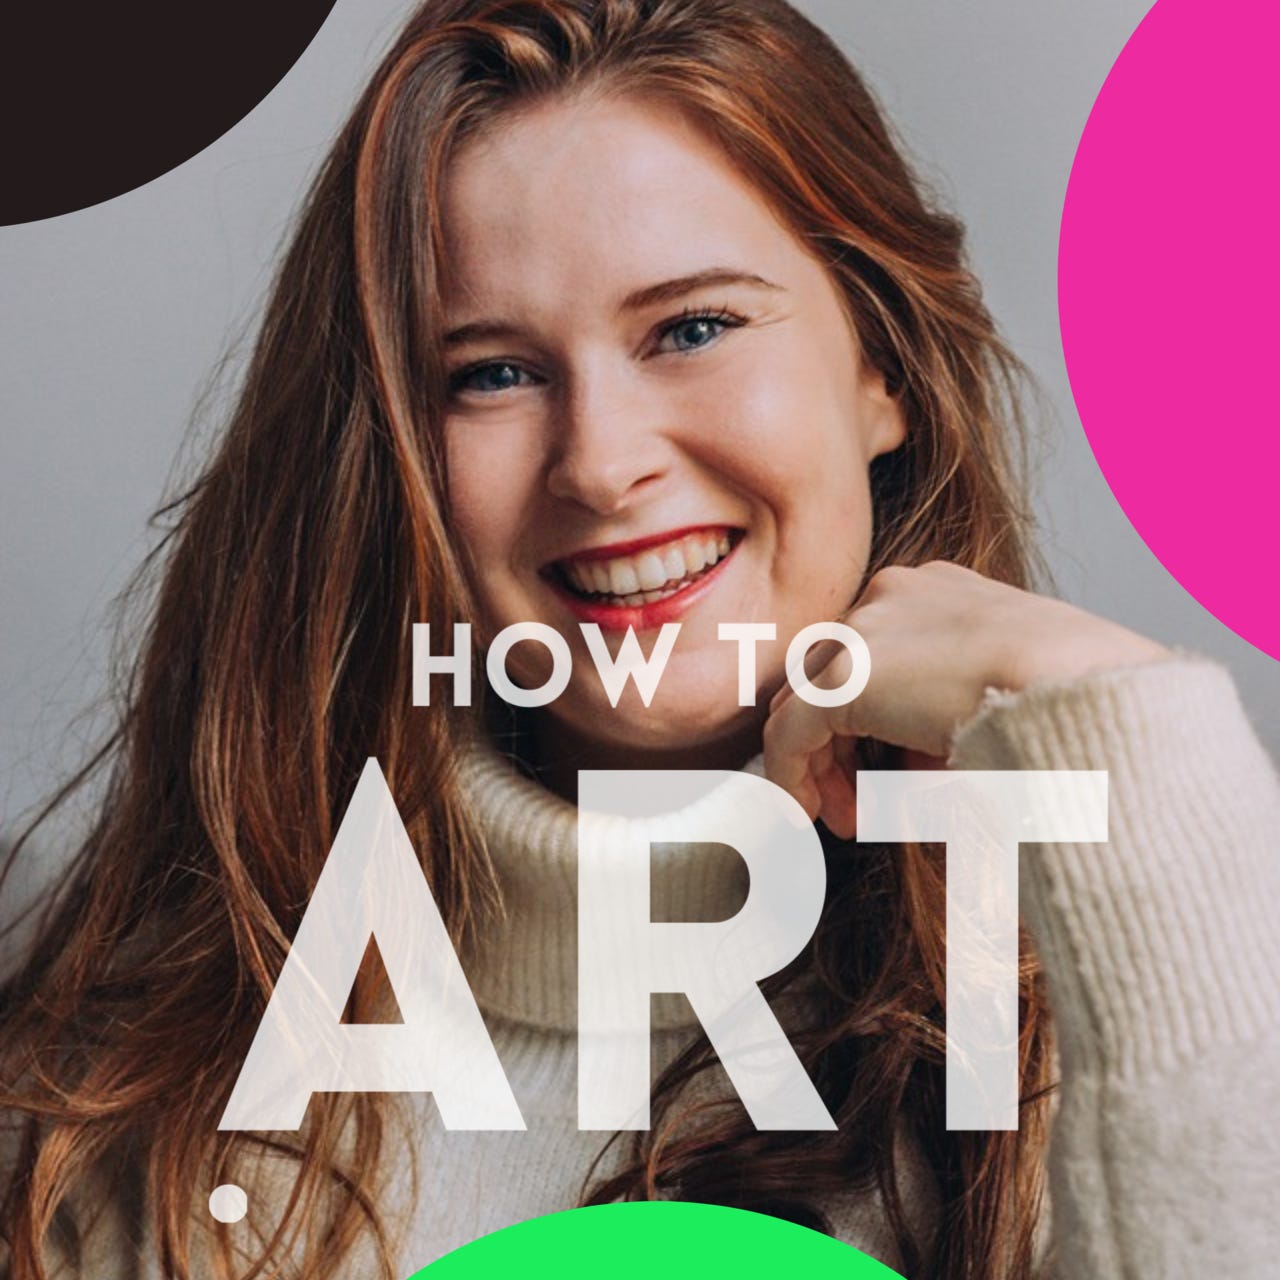 How To Art 